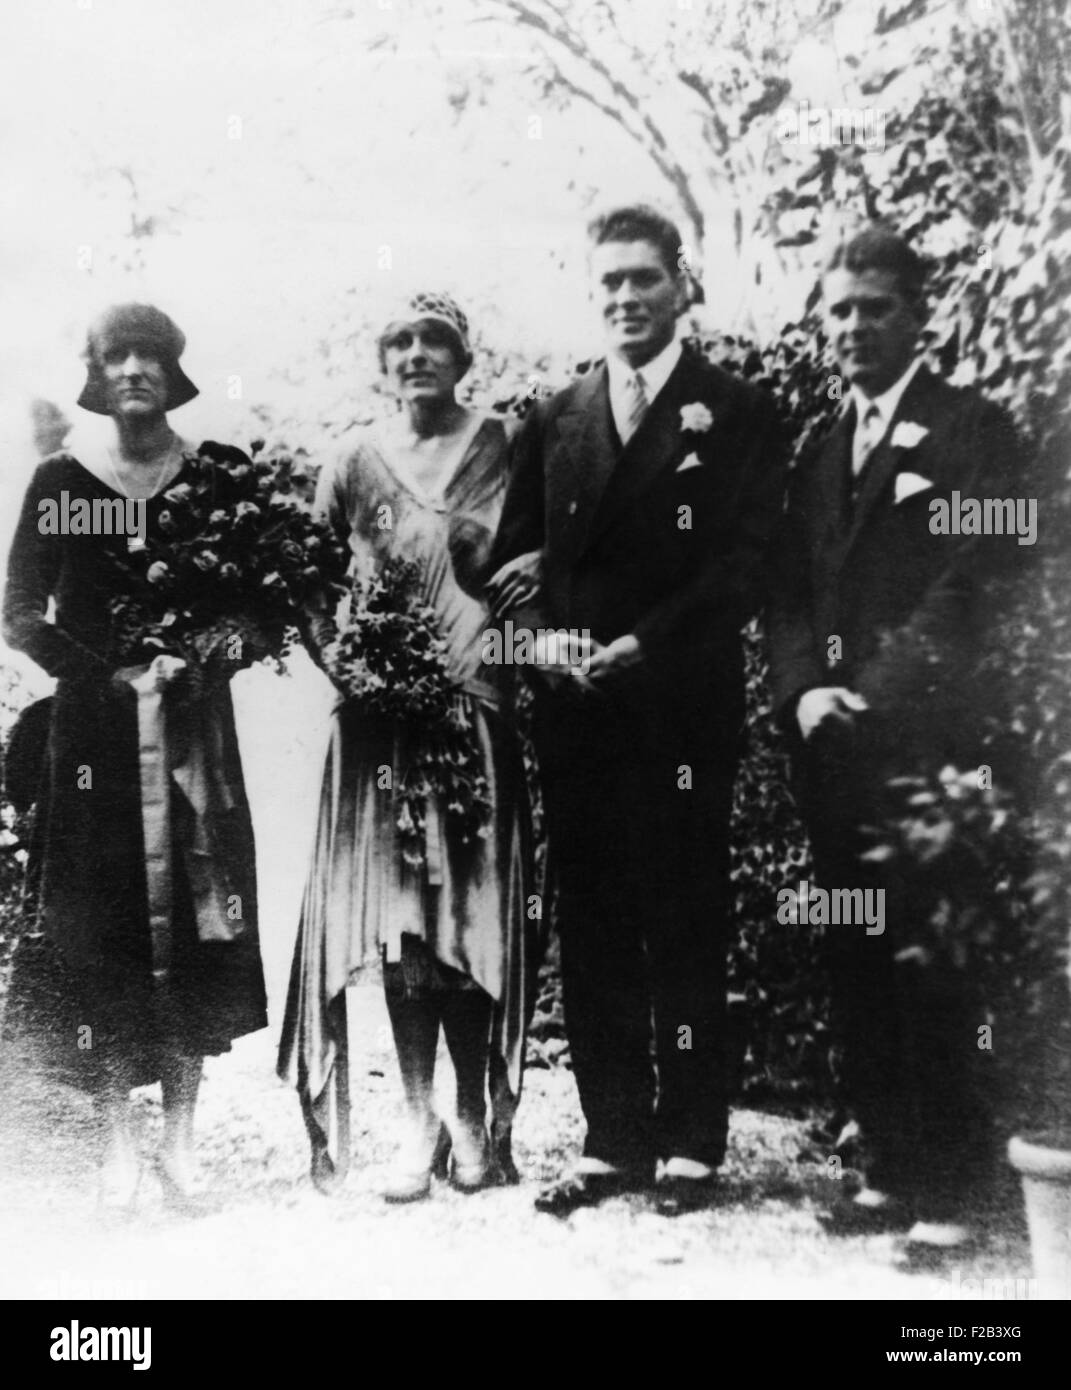 Gene Tunney and wife Polly Lauder Tunney on their wedding day at the Hotel Russie, Rome. Oct. 3, 1928. At right is Dr. Carnos Weekes, the best man. The wedding in Rome caused a press frenzy as photographers jostled to capture images of the couple. - (CSU 2015 5 159) Stock Photo